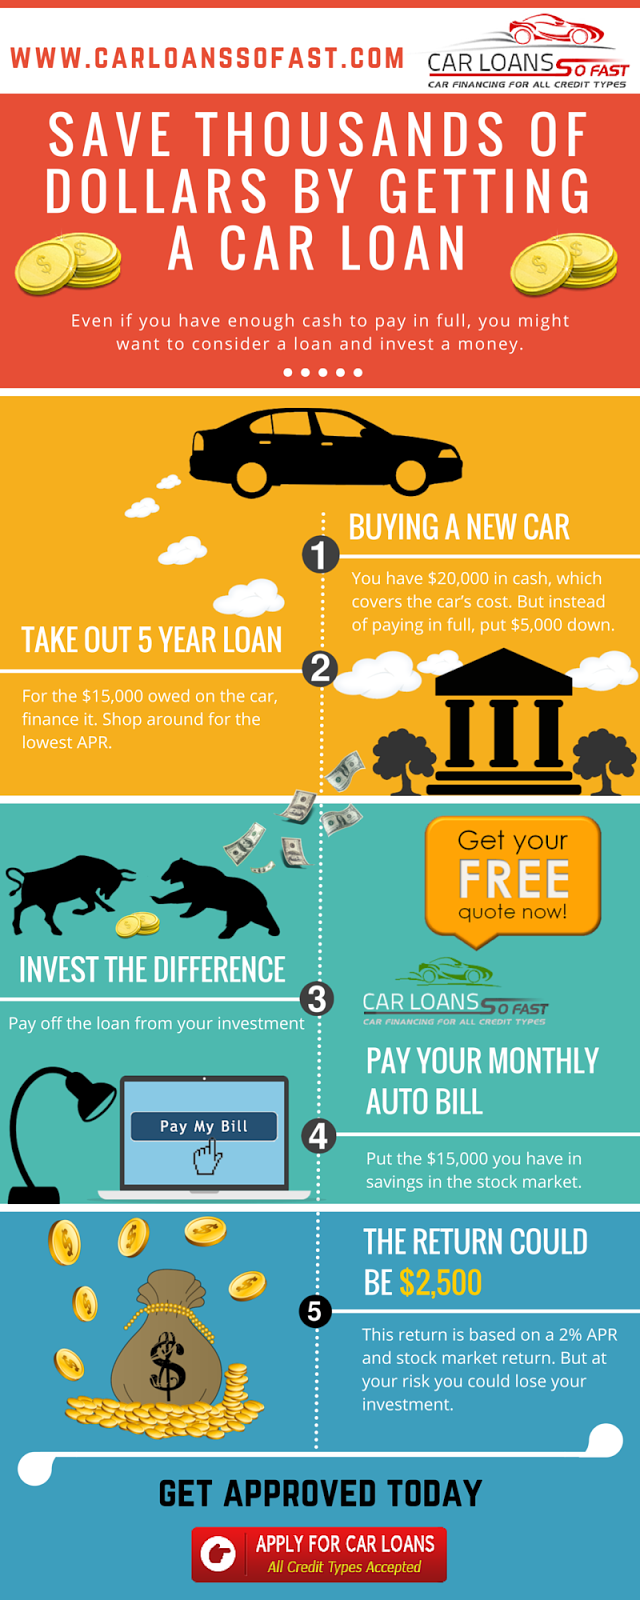 Save Thousands of Dollars by Getting a Car Loan Instead of Buying with Cash